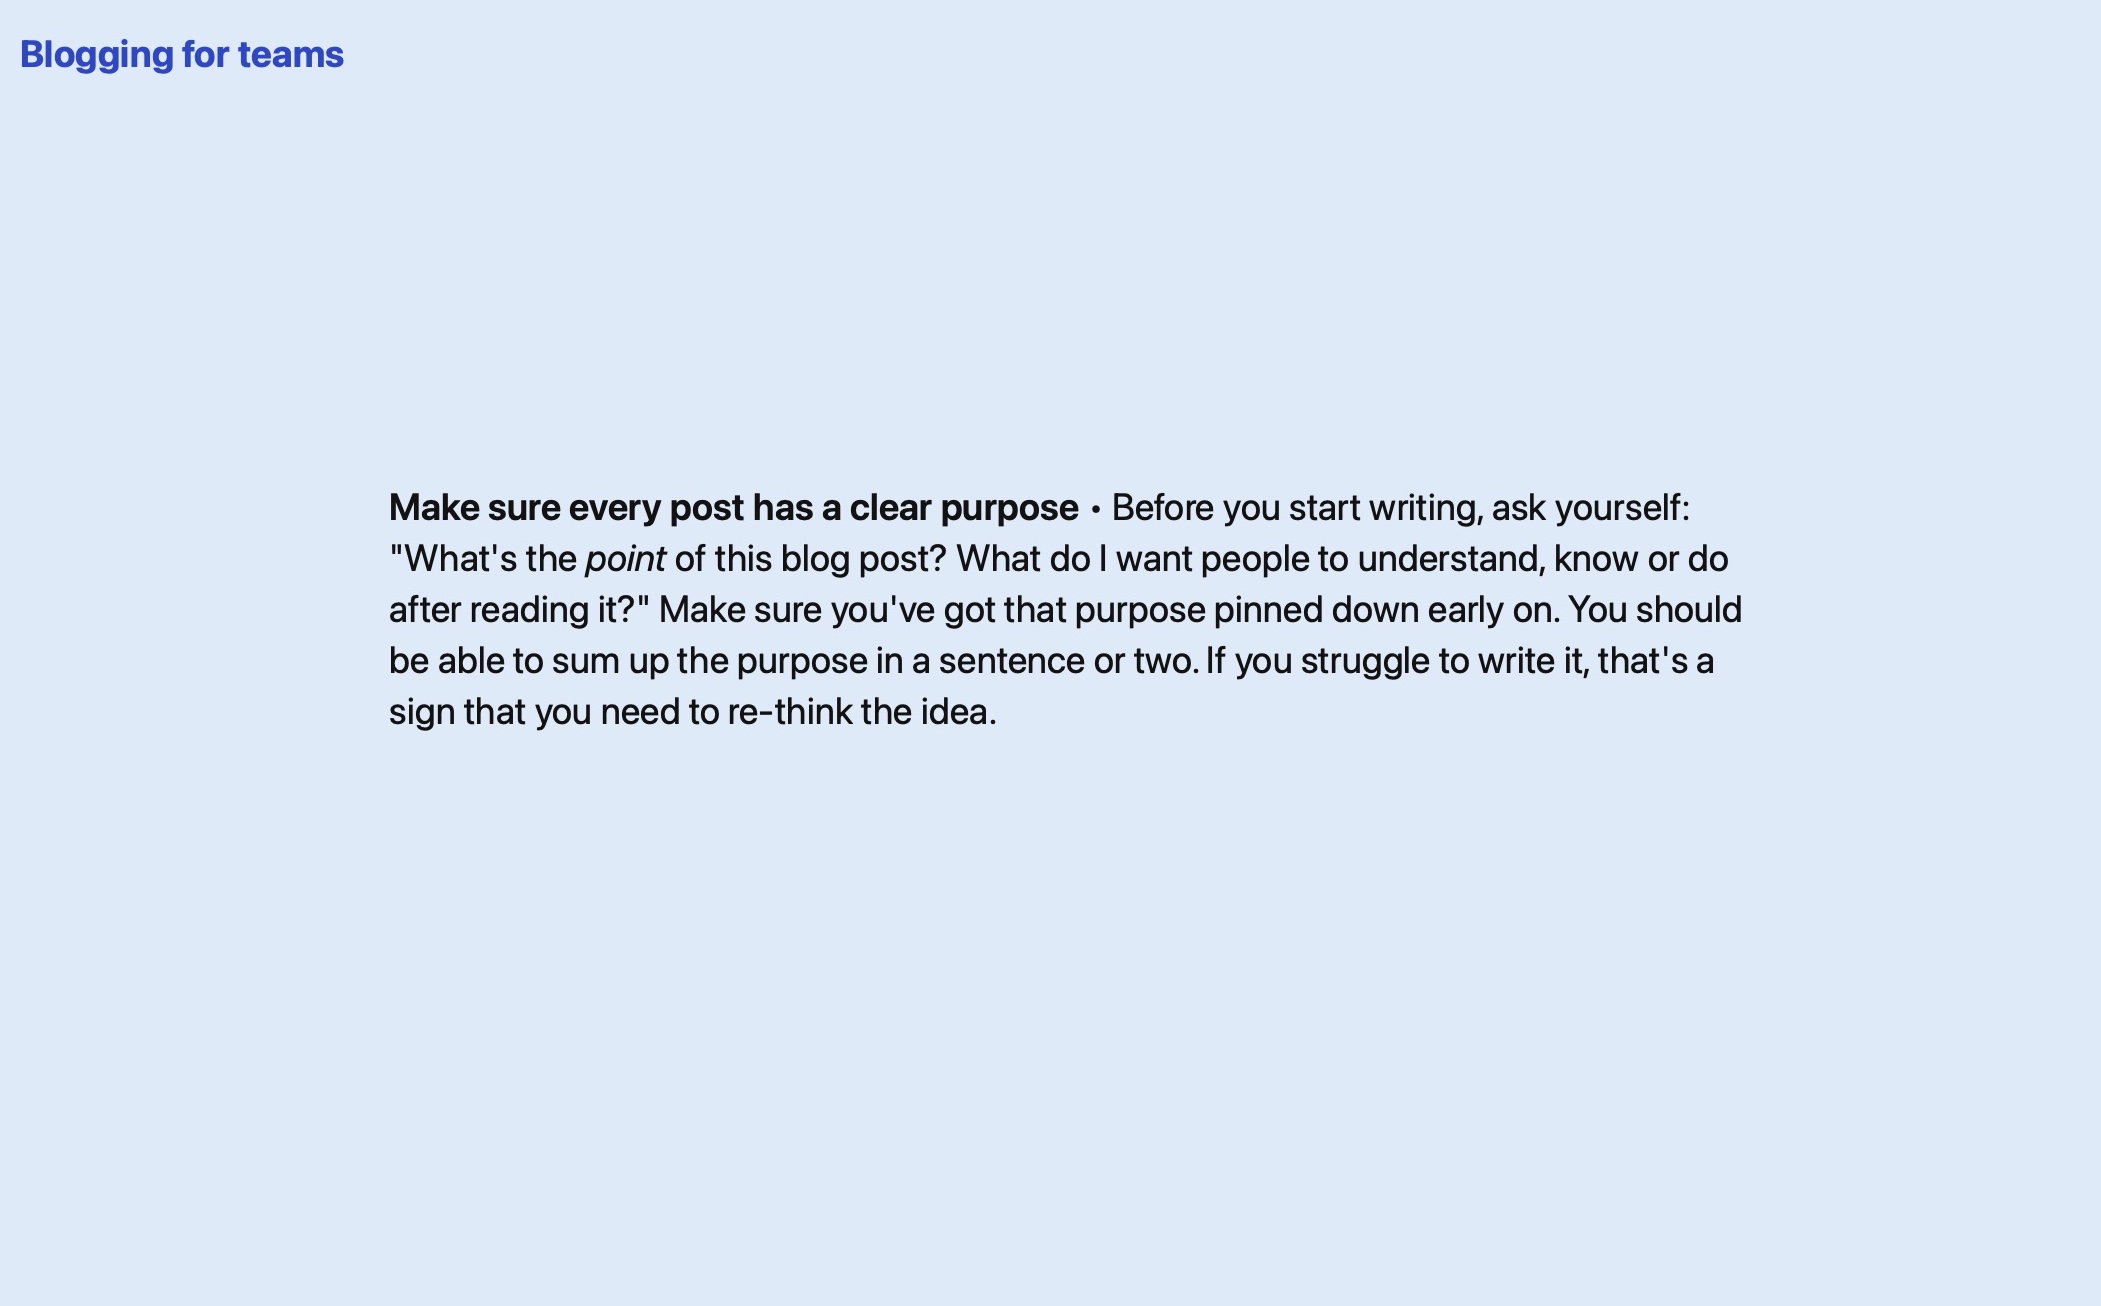 A screenshot of one of the pages on Blogging for teams